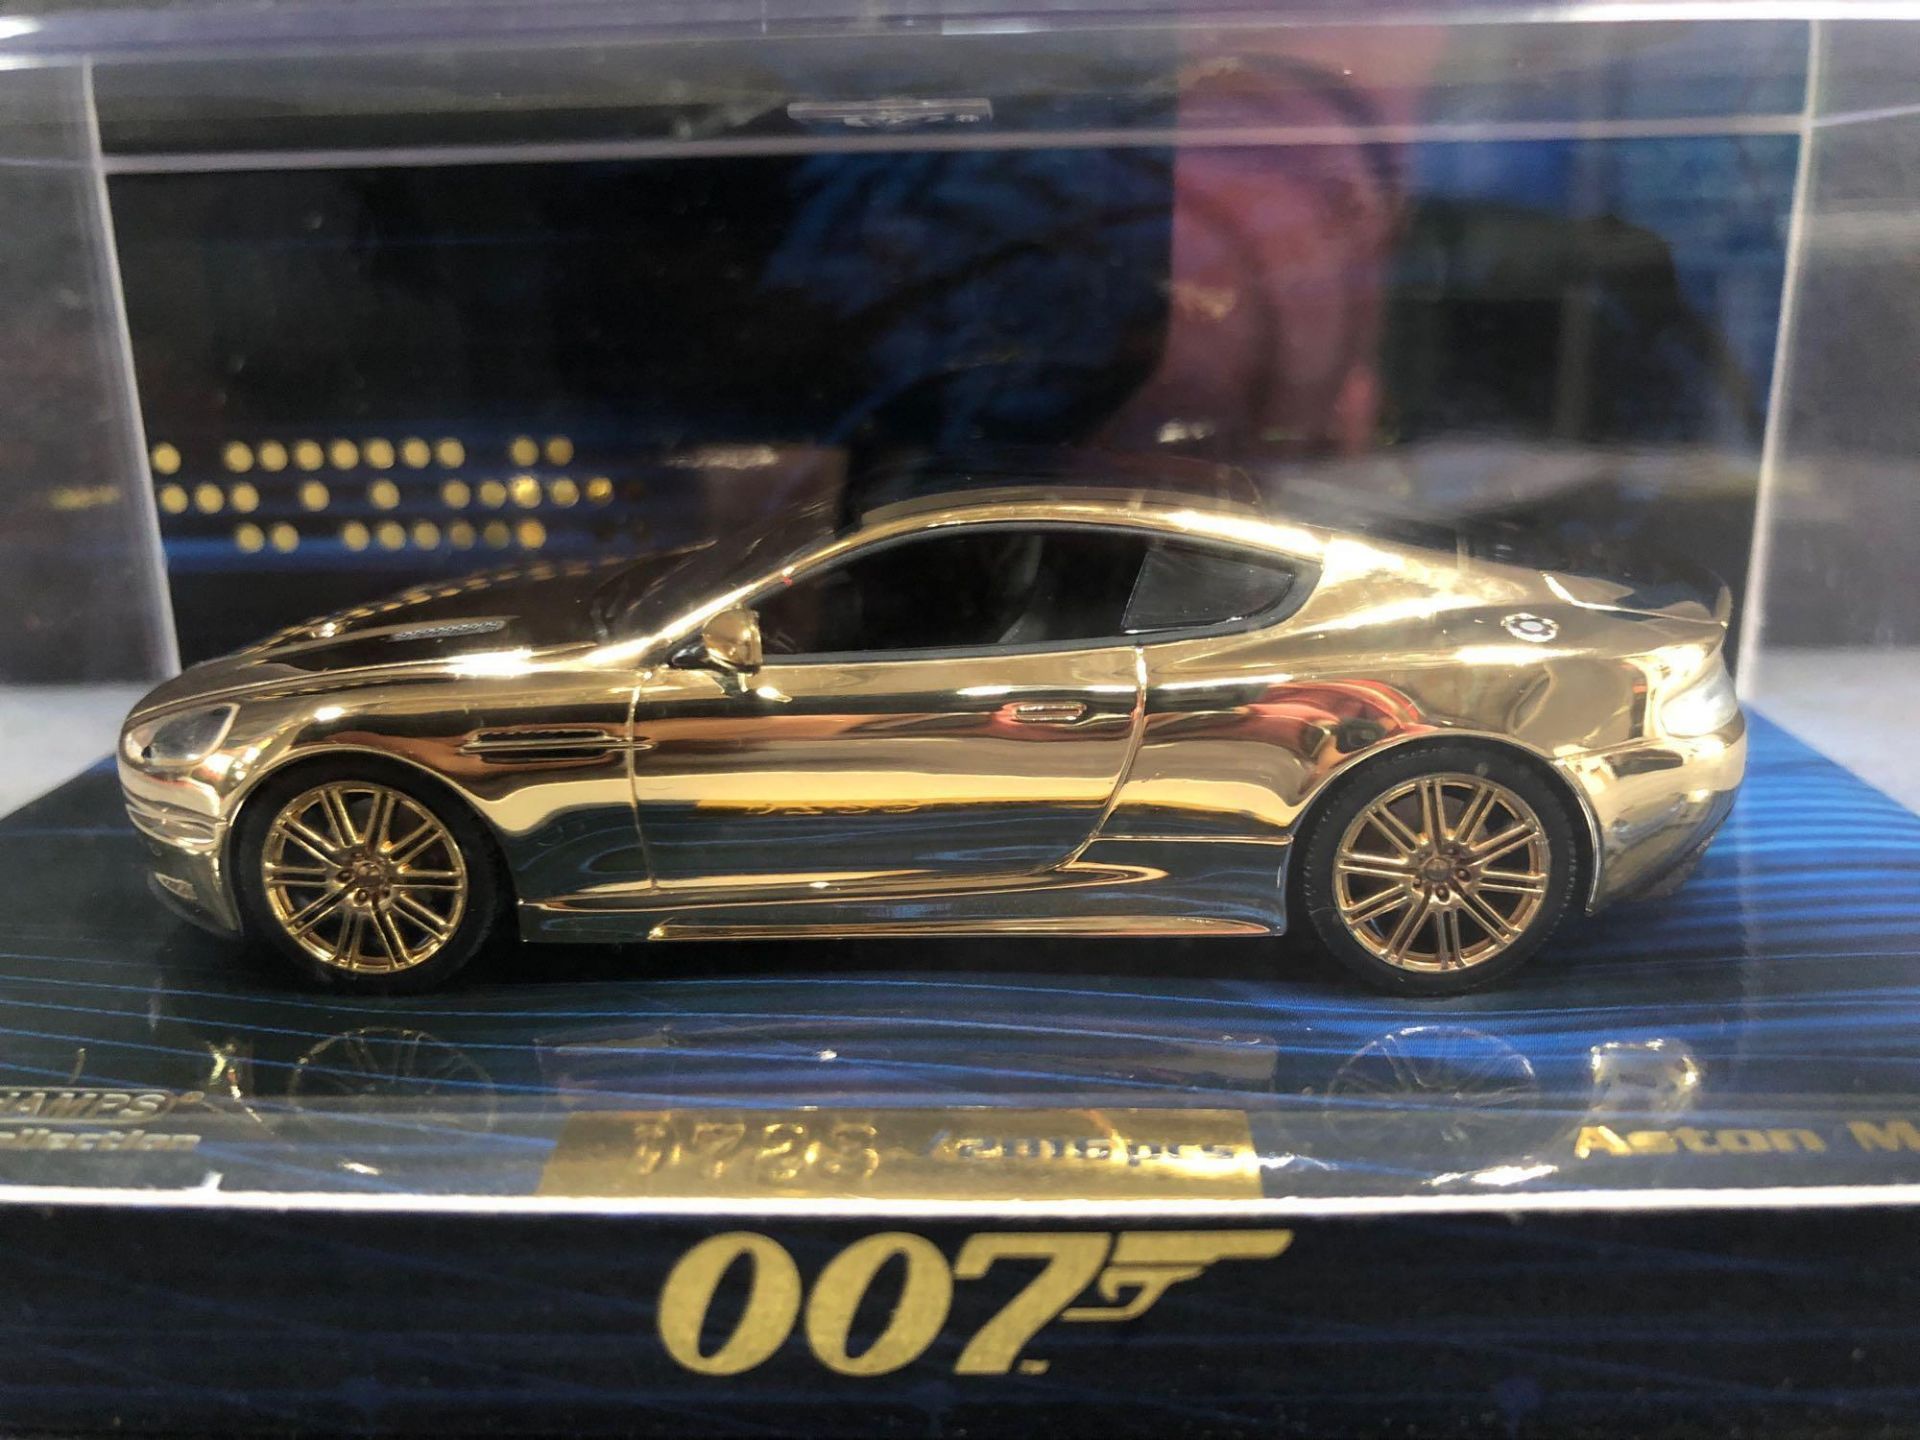 Minichamps Bond Collection Aston Martin DBS In Gold Plated Limited Edition 0723/2016 Pieces - Image 2 of 2